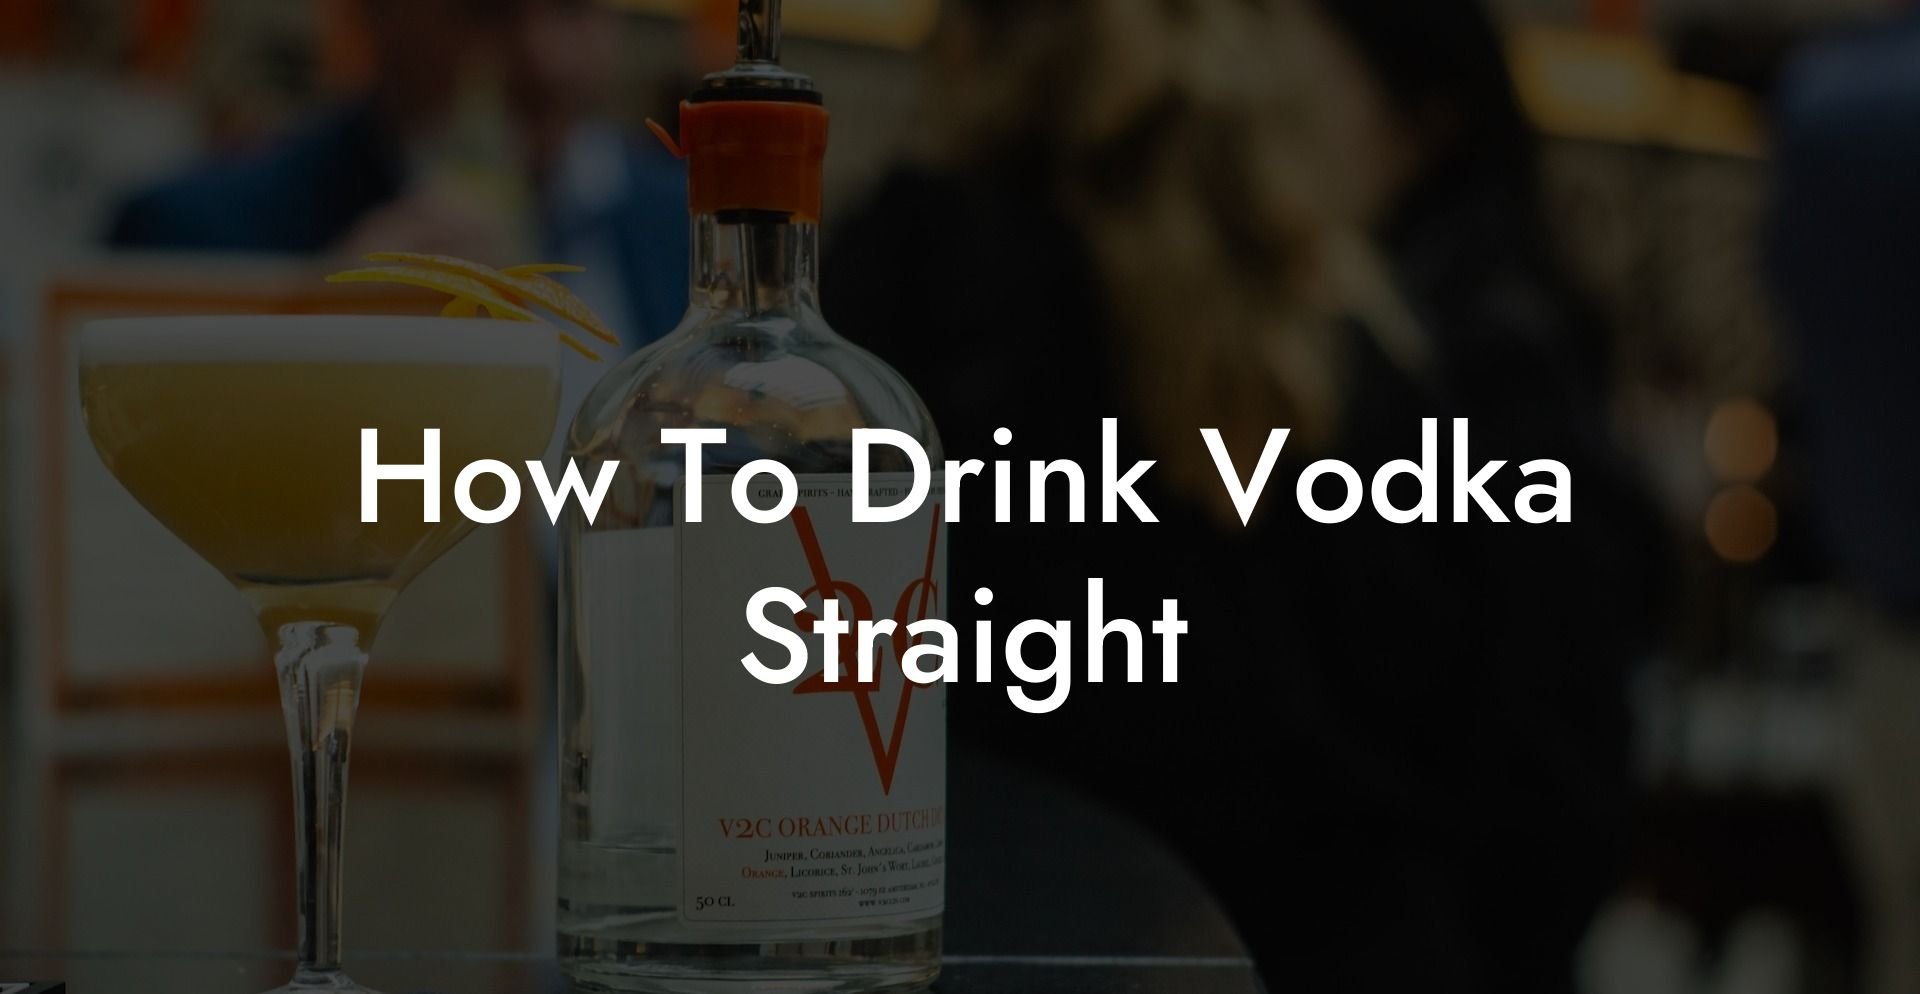 How To Drink Vodka Straight